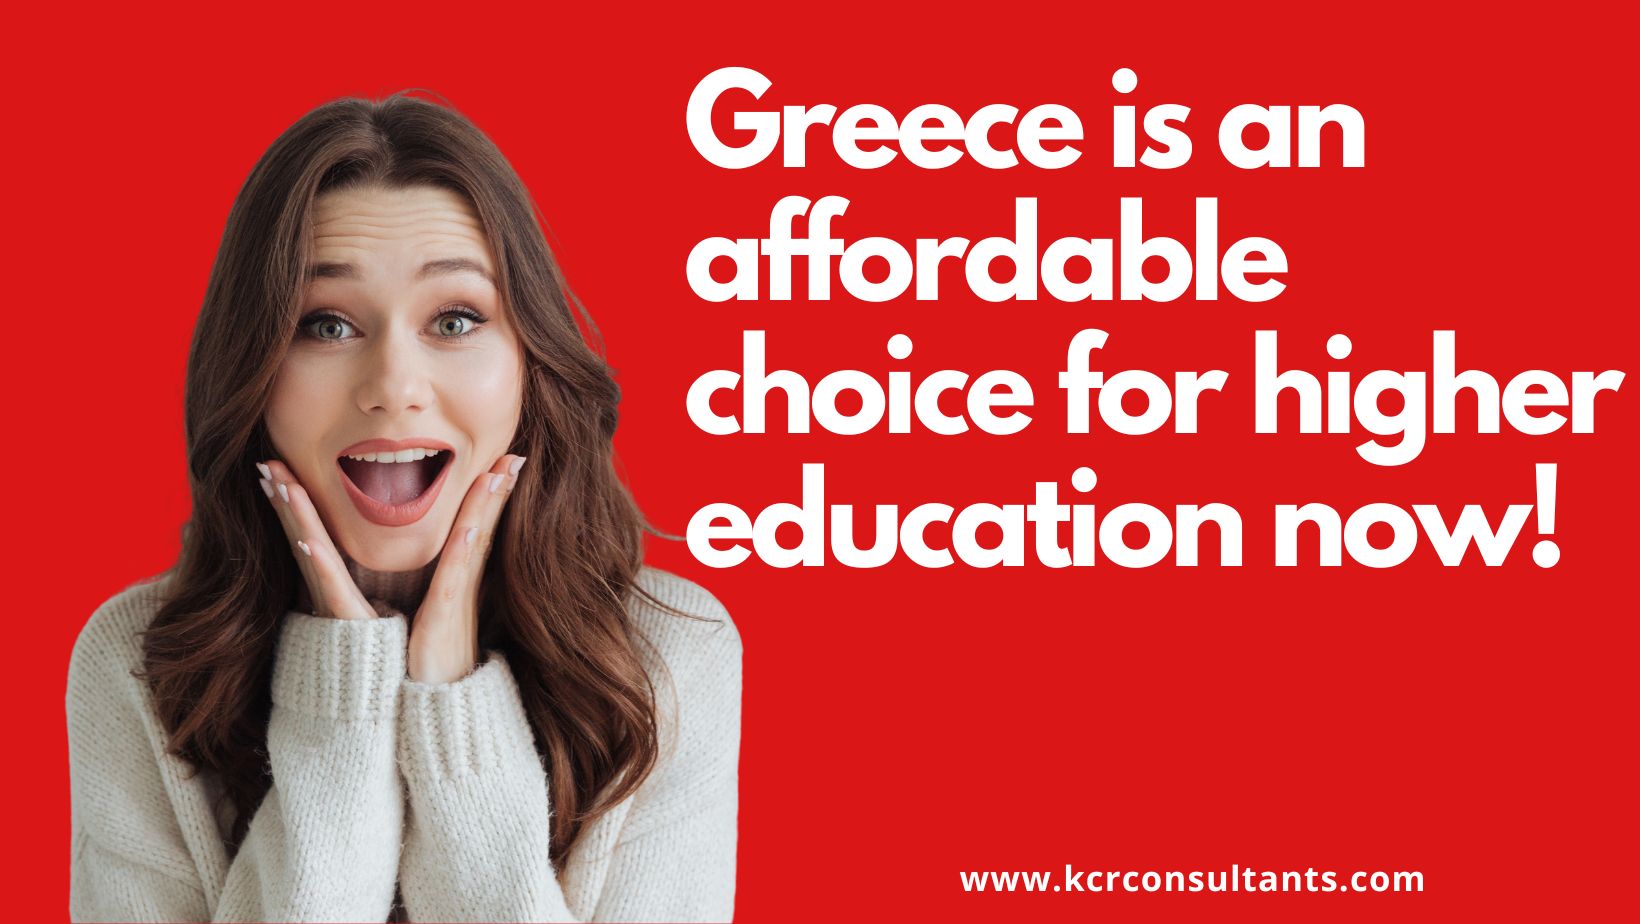 Greece is an affordable choice for higher education now - KCR CONSULTANTS